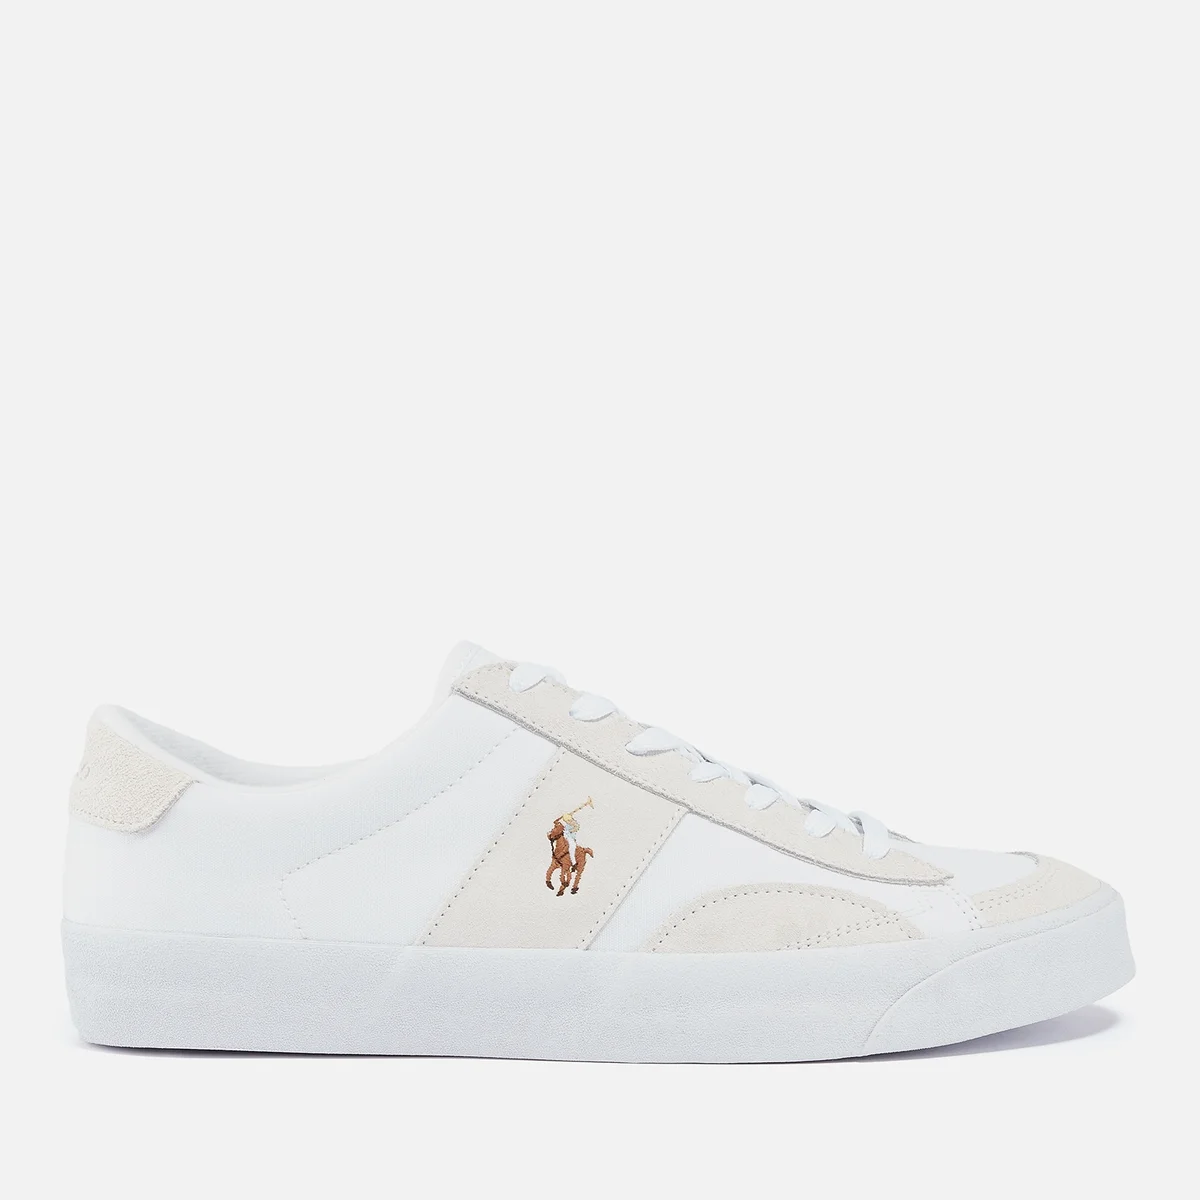 Polo Ralph Lauren Men's Sayer Canvas and Suede Trainers Image 1